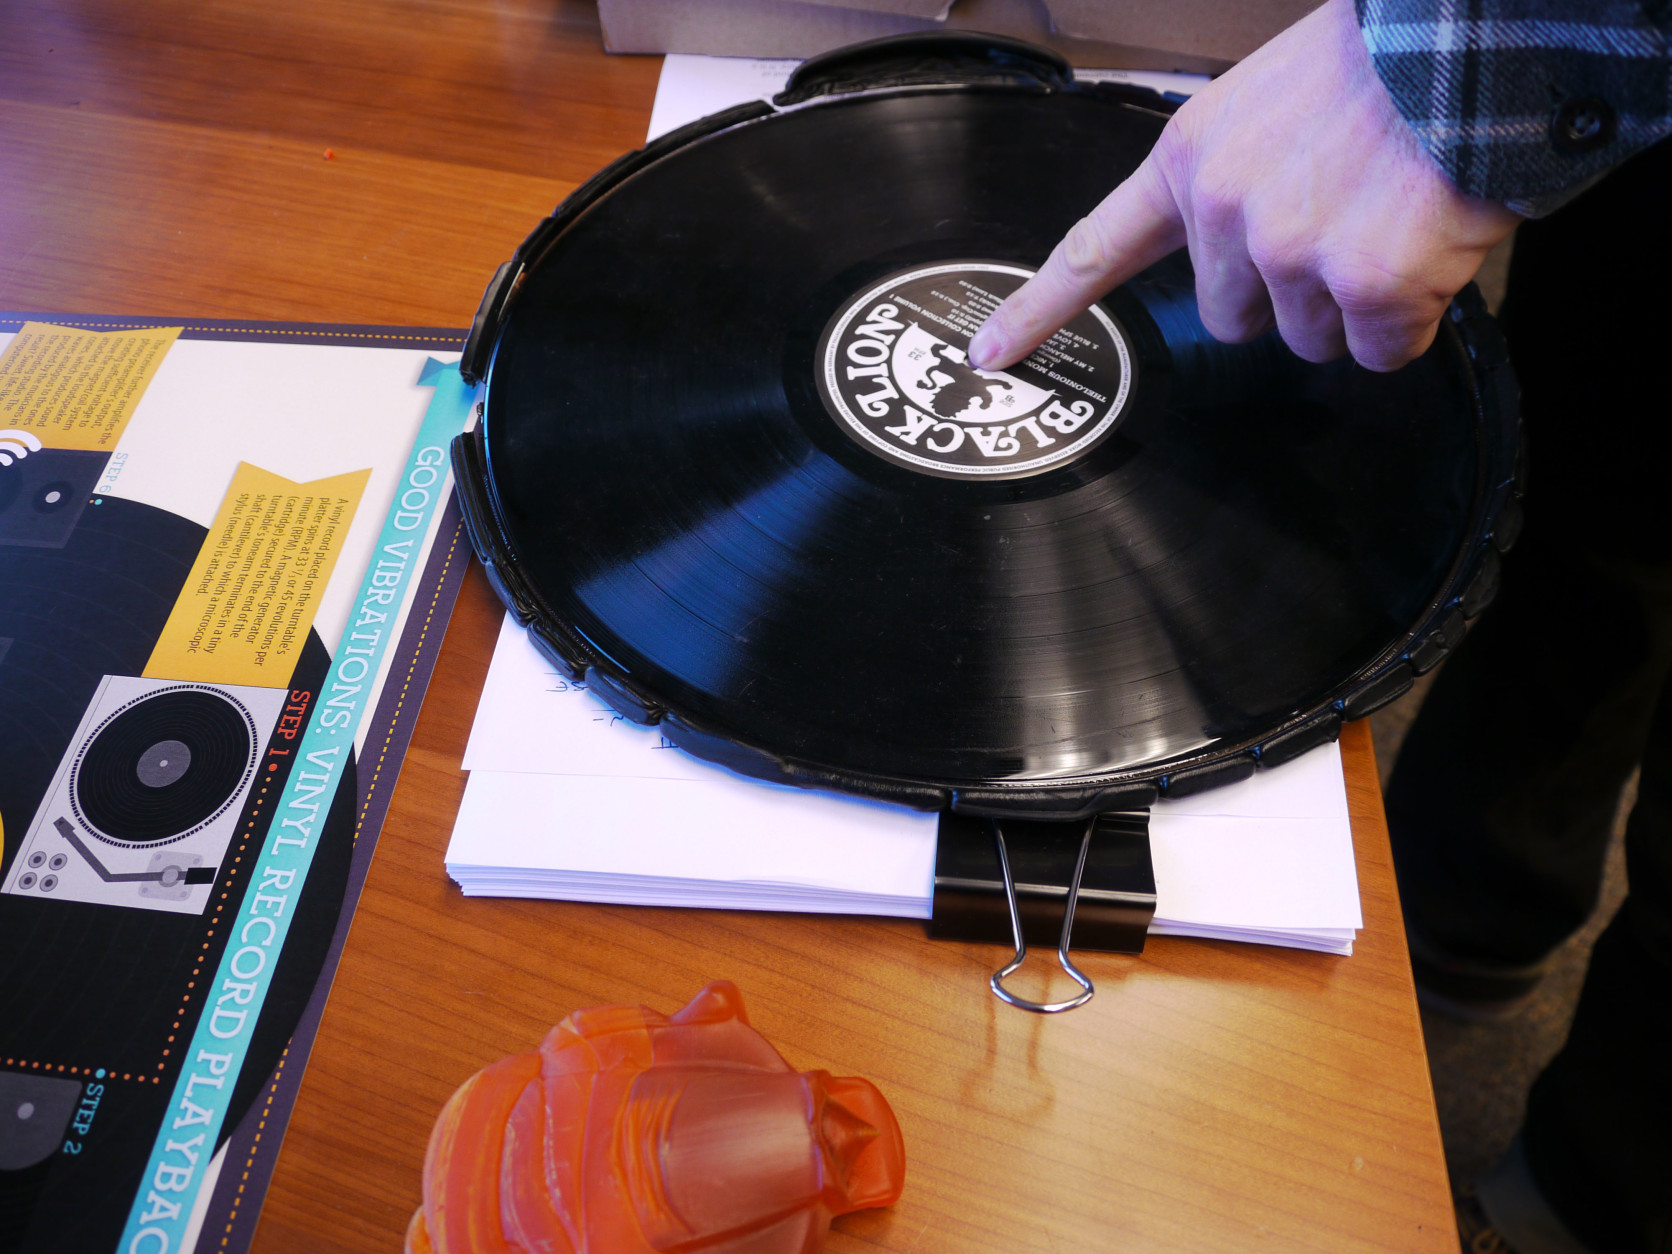 During the record-making process, a knife will cut away the excess vinyl from a pressing. Eric Astor, president and founder of Furnace Record Pressing in Fairfax, Va.shows a sample of a record that has not been cut. (WTOP/Tiffany Arnold)